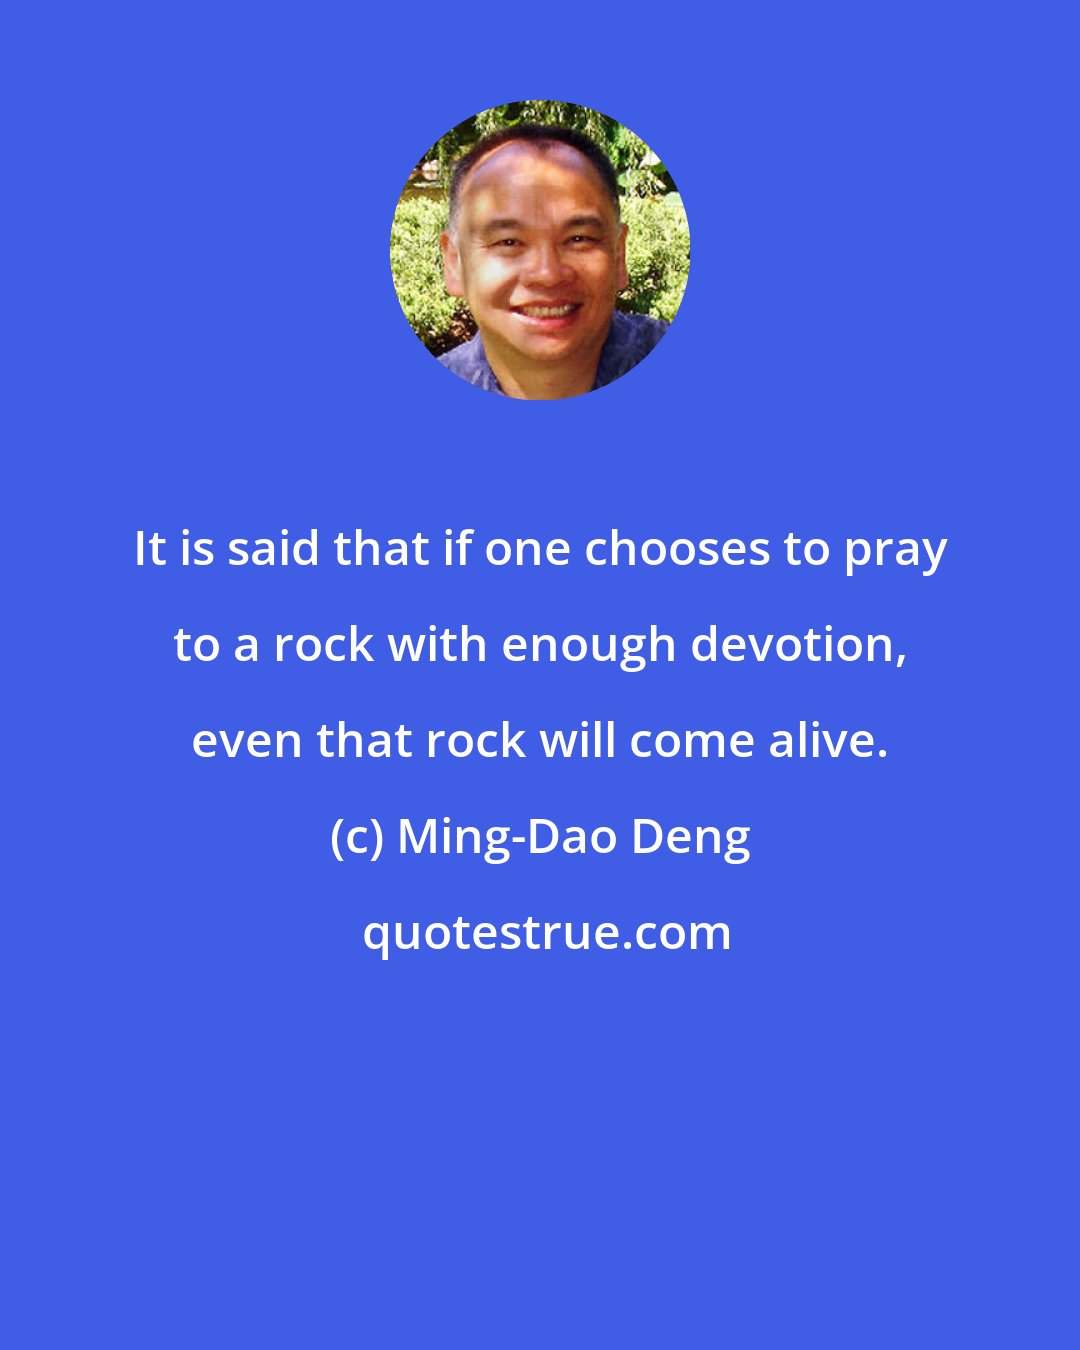 Ming-Dao Deng: It is said that if one chooses to pray to a rock with enough devotion, even that rock will come alive.